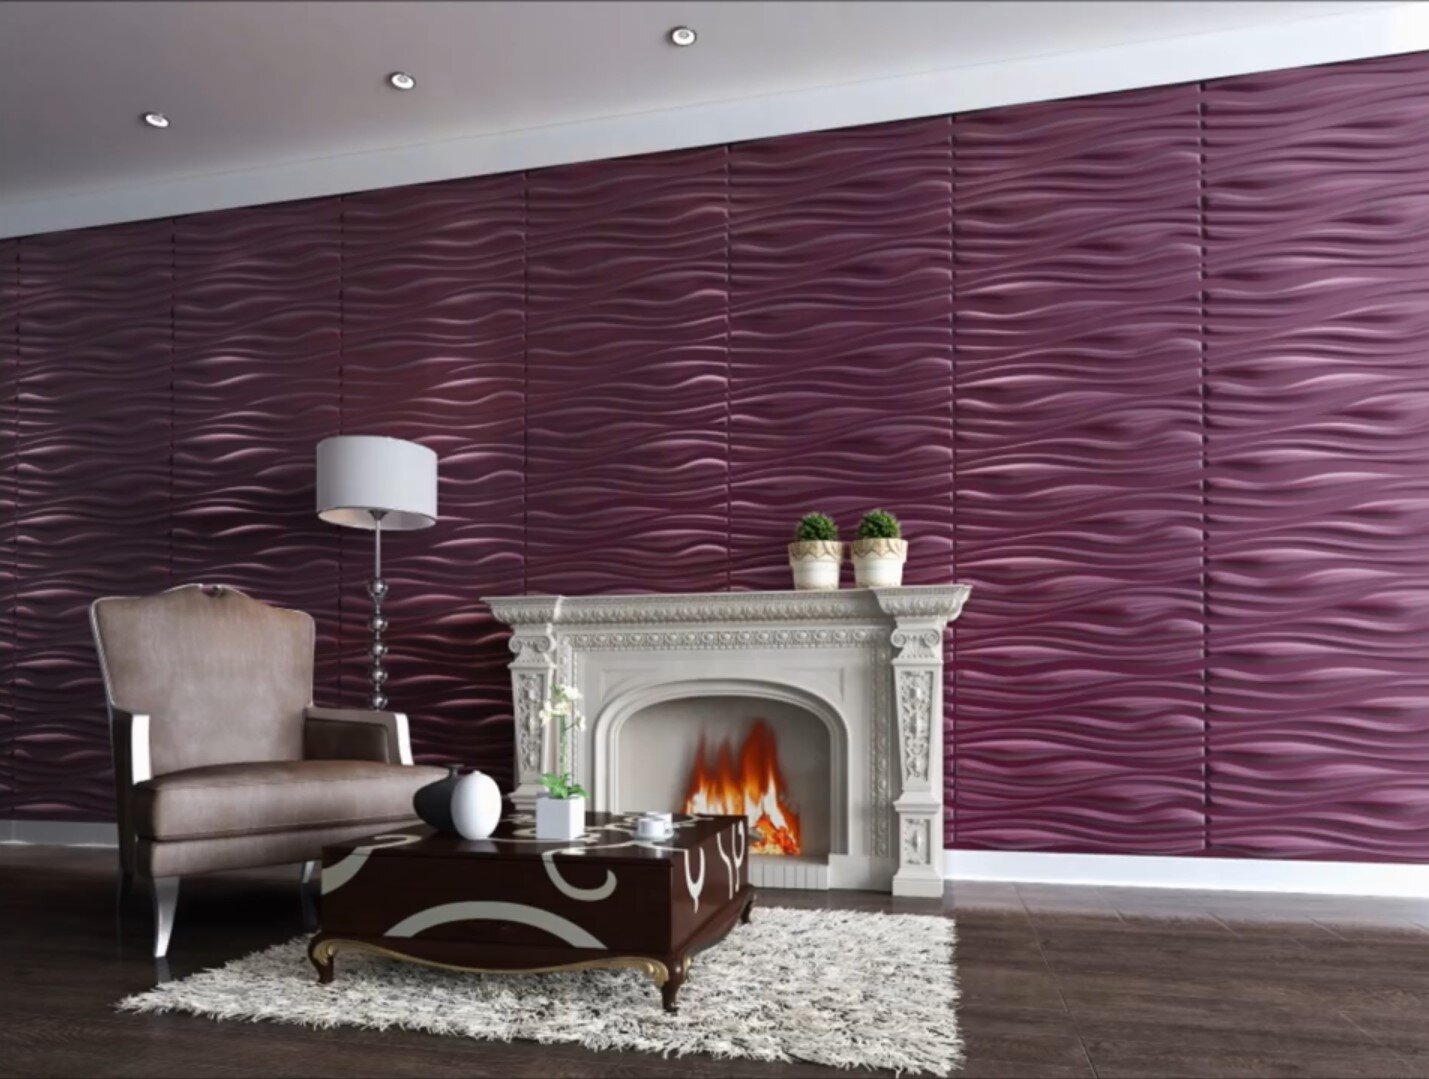 Accent Wall Ideas Beyond The Ordinary - Reflect Your Personal Style 00011.jpg